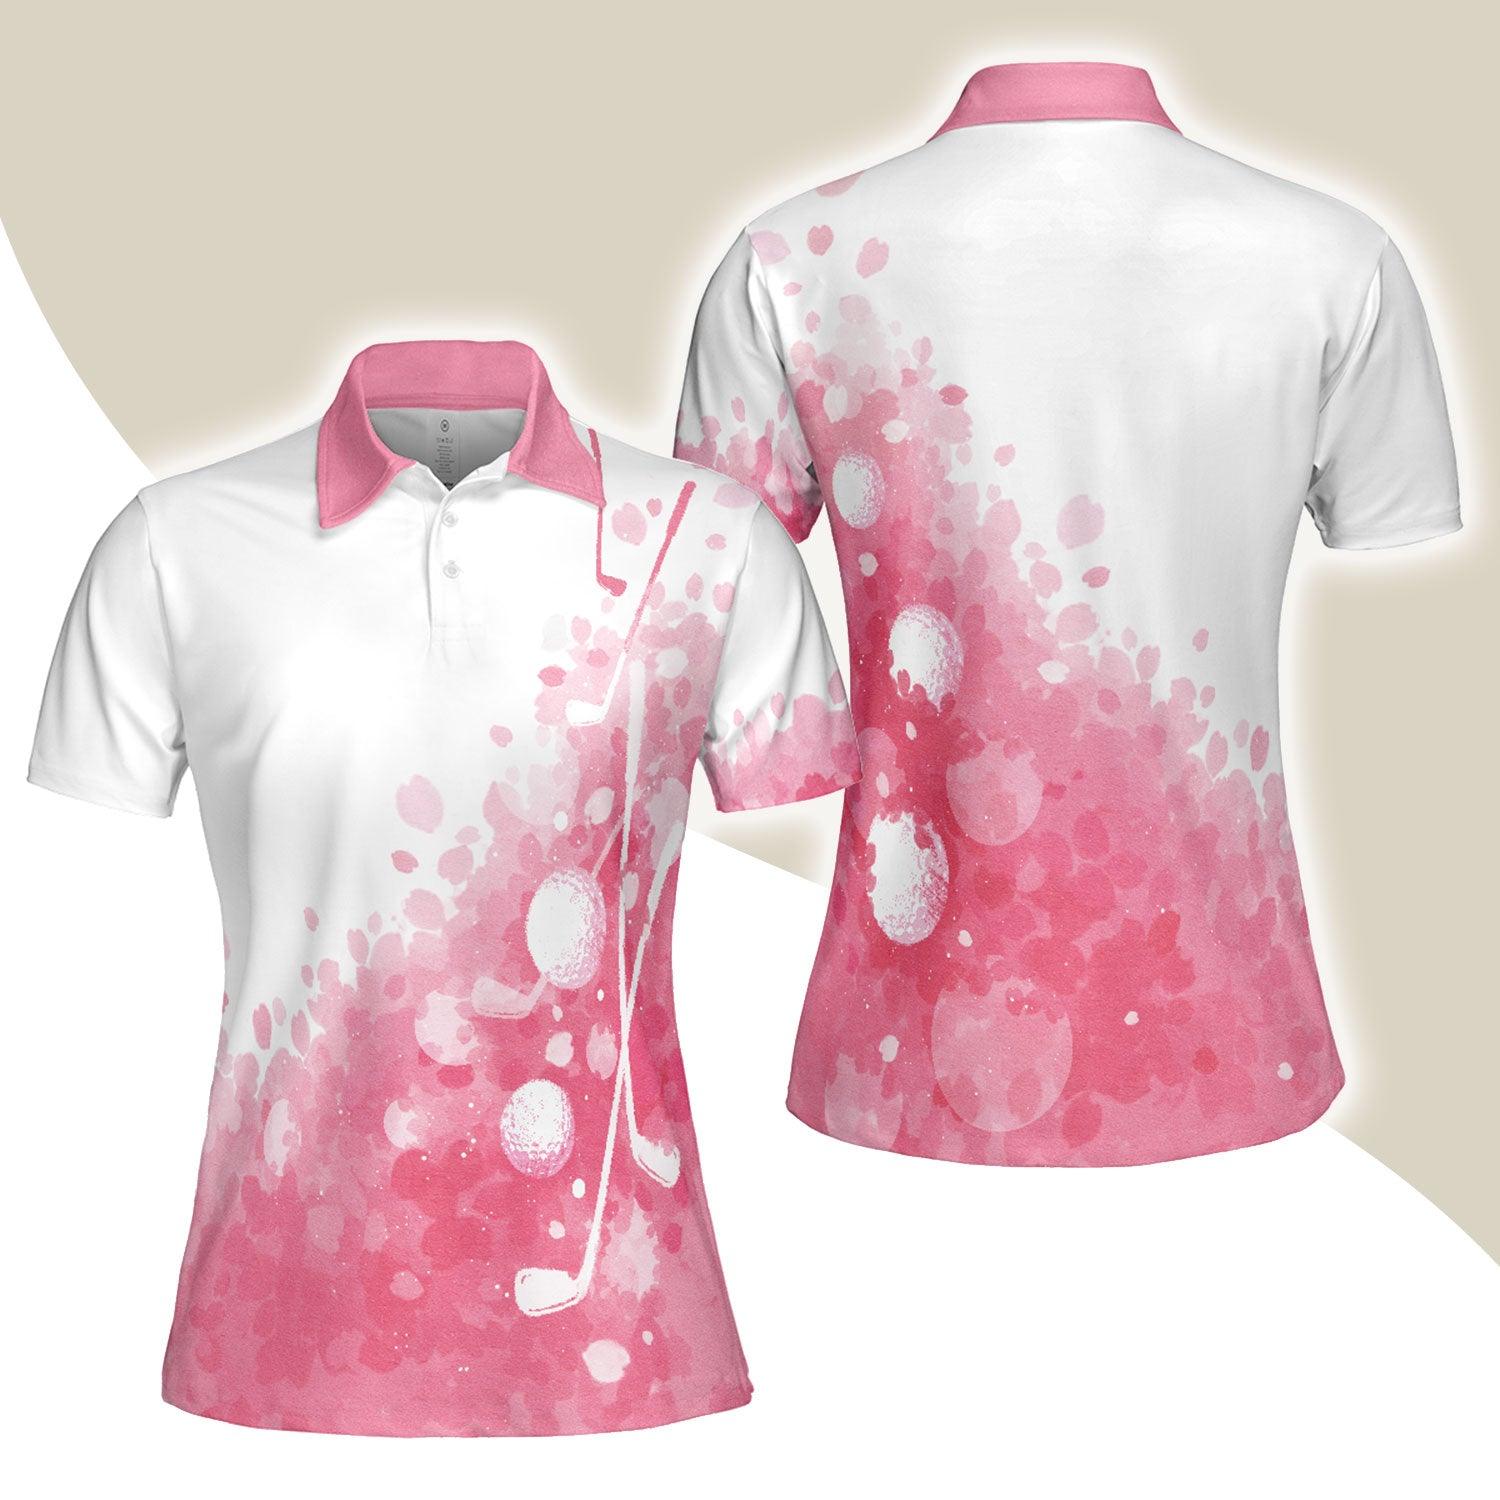 Golf Women Polo Shirt, Artistic Pink And White Golf Shirt For Ladies - Perfect Gift For Golfers, Golf Lovers - Amzanimalsgift